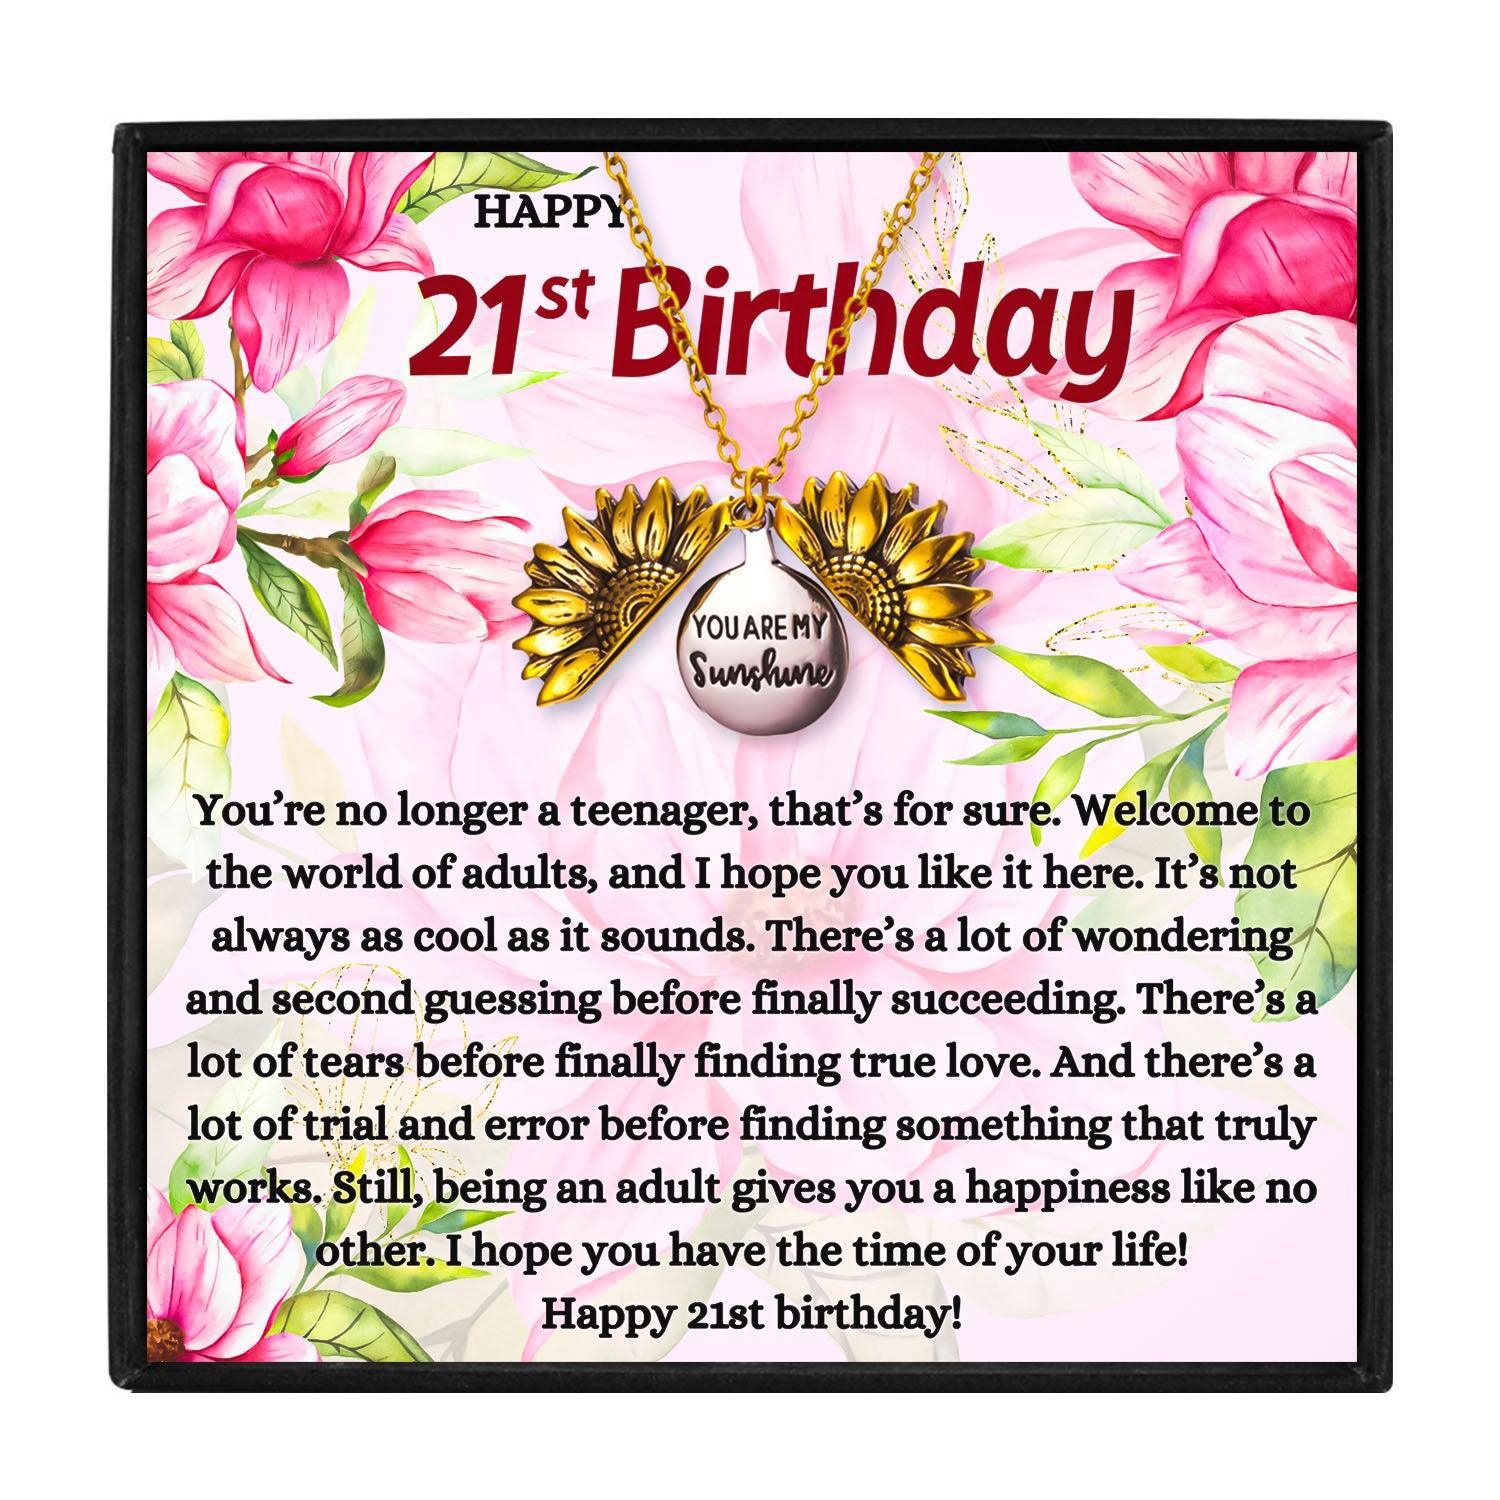 21st Birthday Gifts For Her To Celebrate The Big Day for Christmas 2023 | 21st Birthday Gifts For Her To Celebrate The Big Day - undefined | 21st birthday gifts for daughter, 21st birthday gifts for her, 21st birthday necklace, 21st gift ideas, best 21st birthday gifts for her | From Hunny Life | hunnylife.com